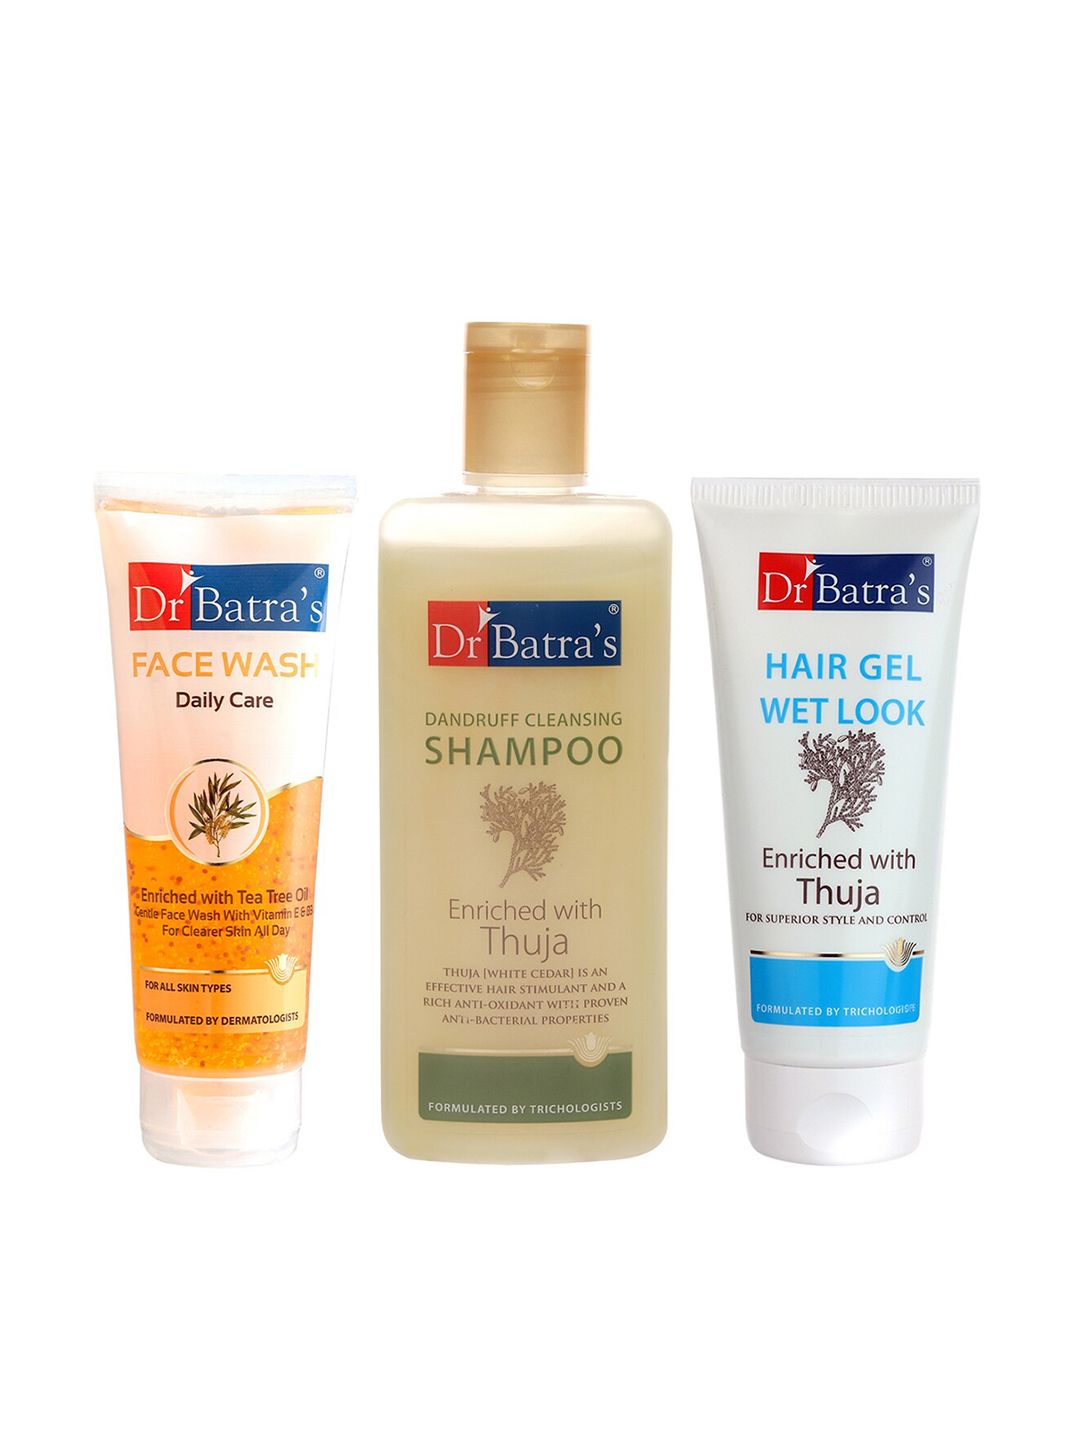 Dr Batra's Dandruff Cleansing Shampoo, Hair Gel and Face Wash Price in India